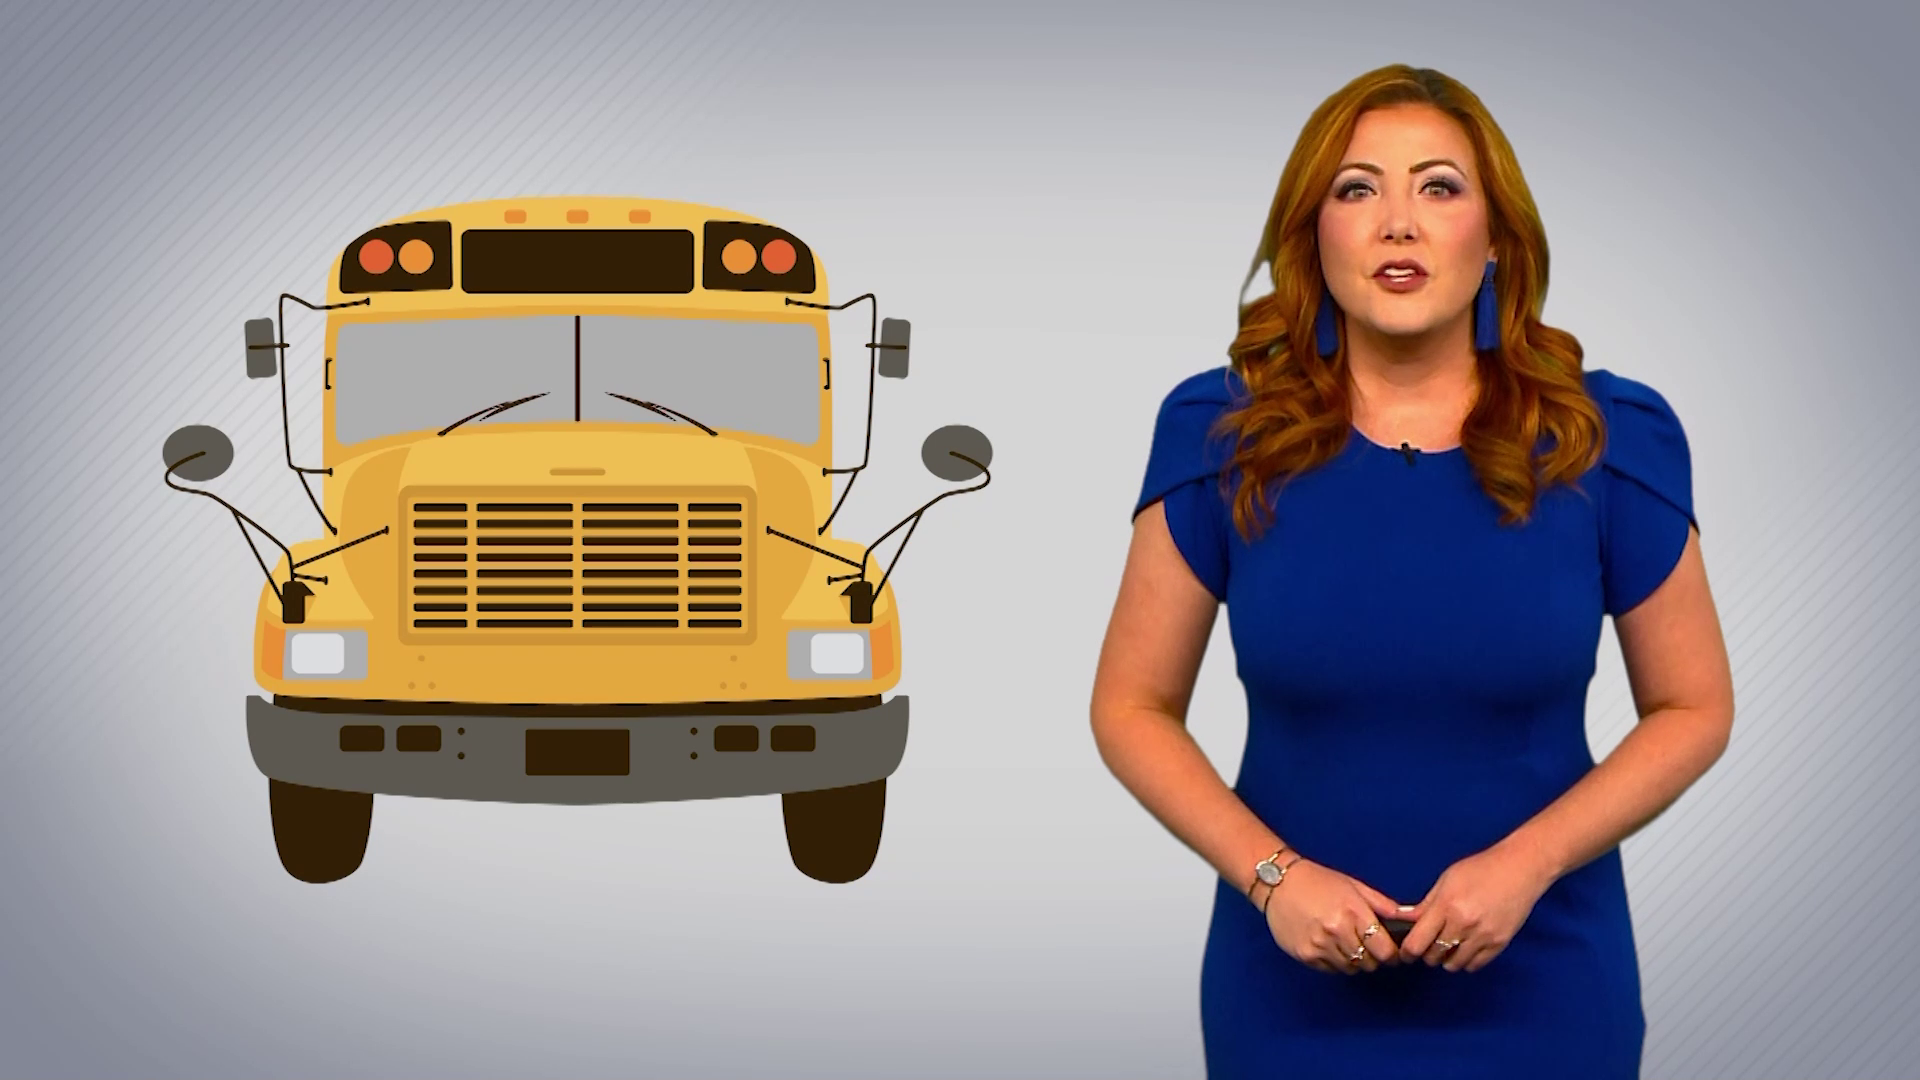 In Texas, if you pass a school bus when it’s actively loading or unloading passengers, you’ll face a fine of up to $1250.